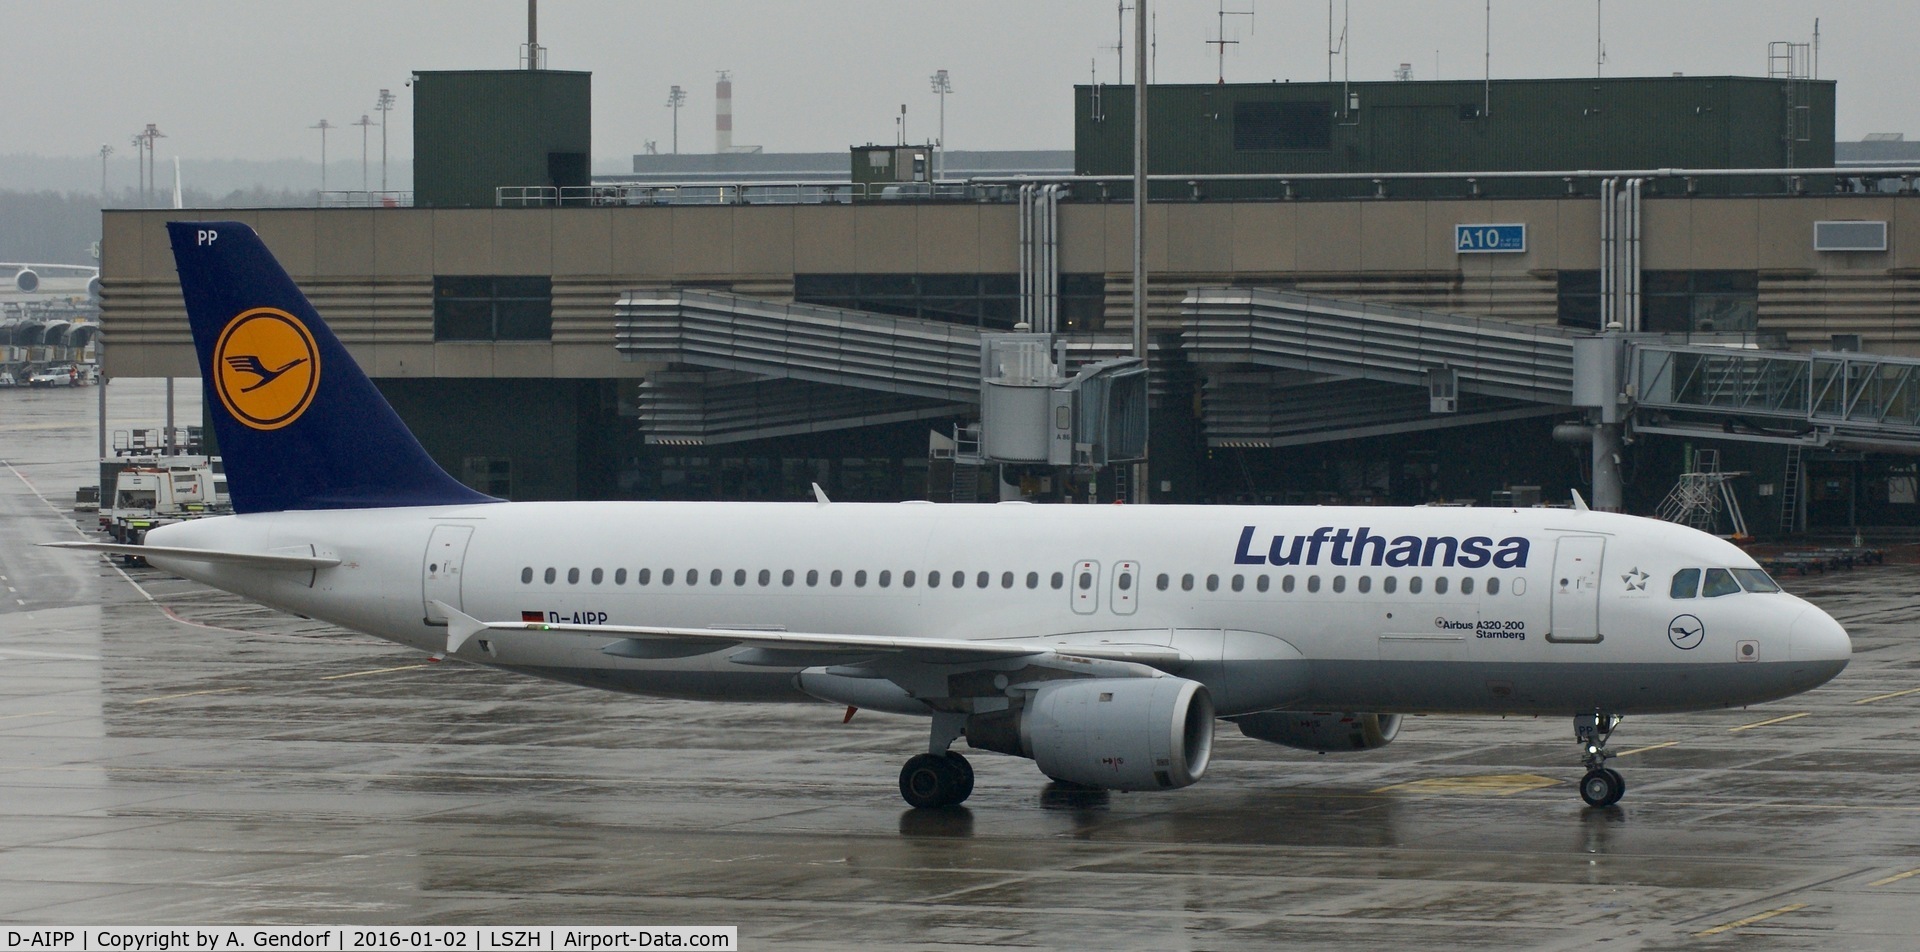 D-AIPP, 1990 Airbus A320-211 C/N 110, Lufthansa, is here taxiing to the gate at Zürich-Kloten(LSZH)